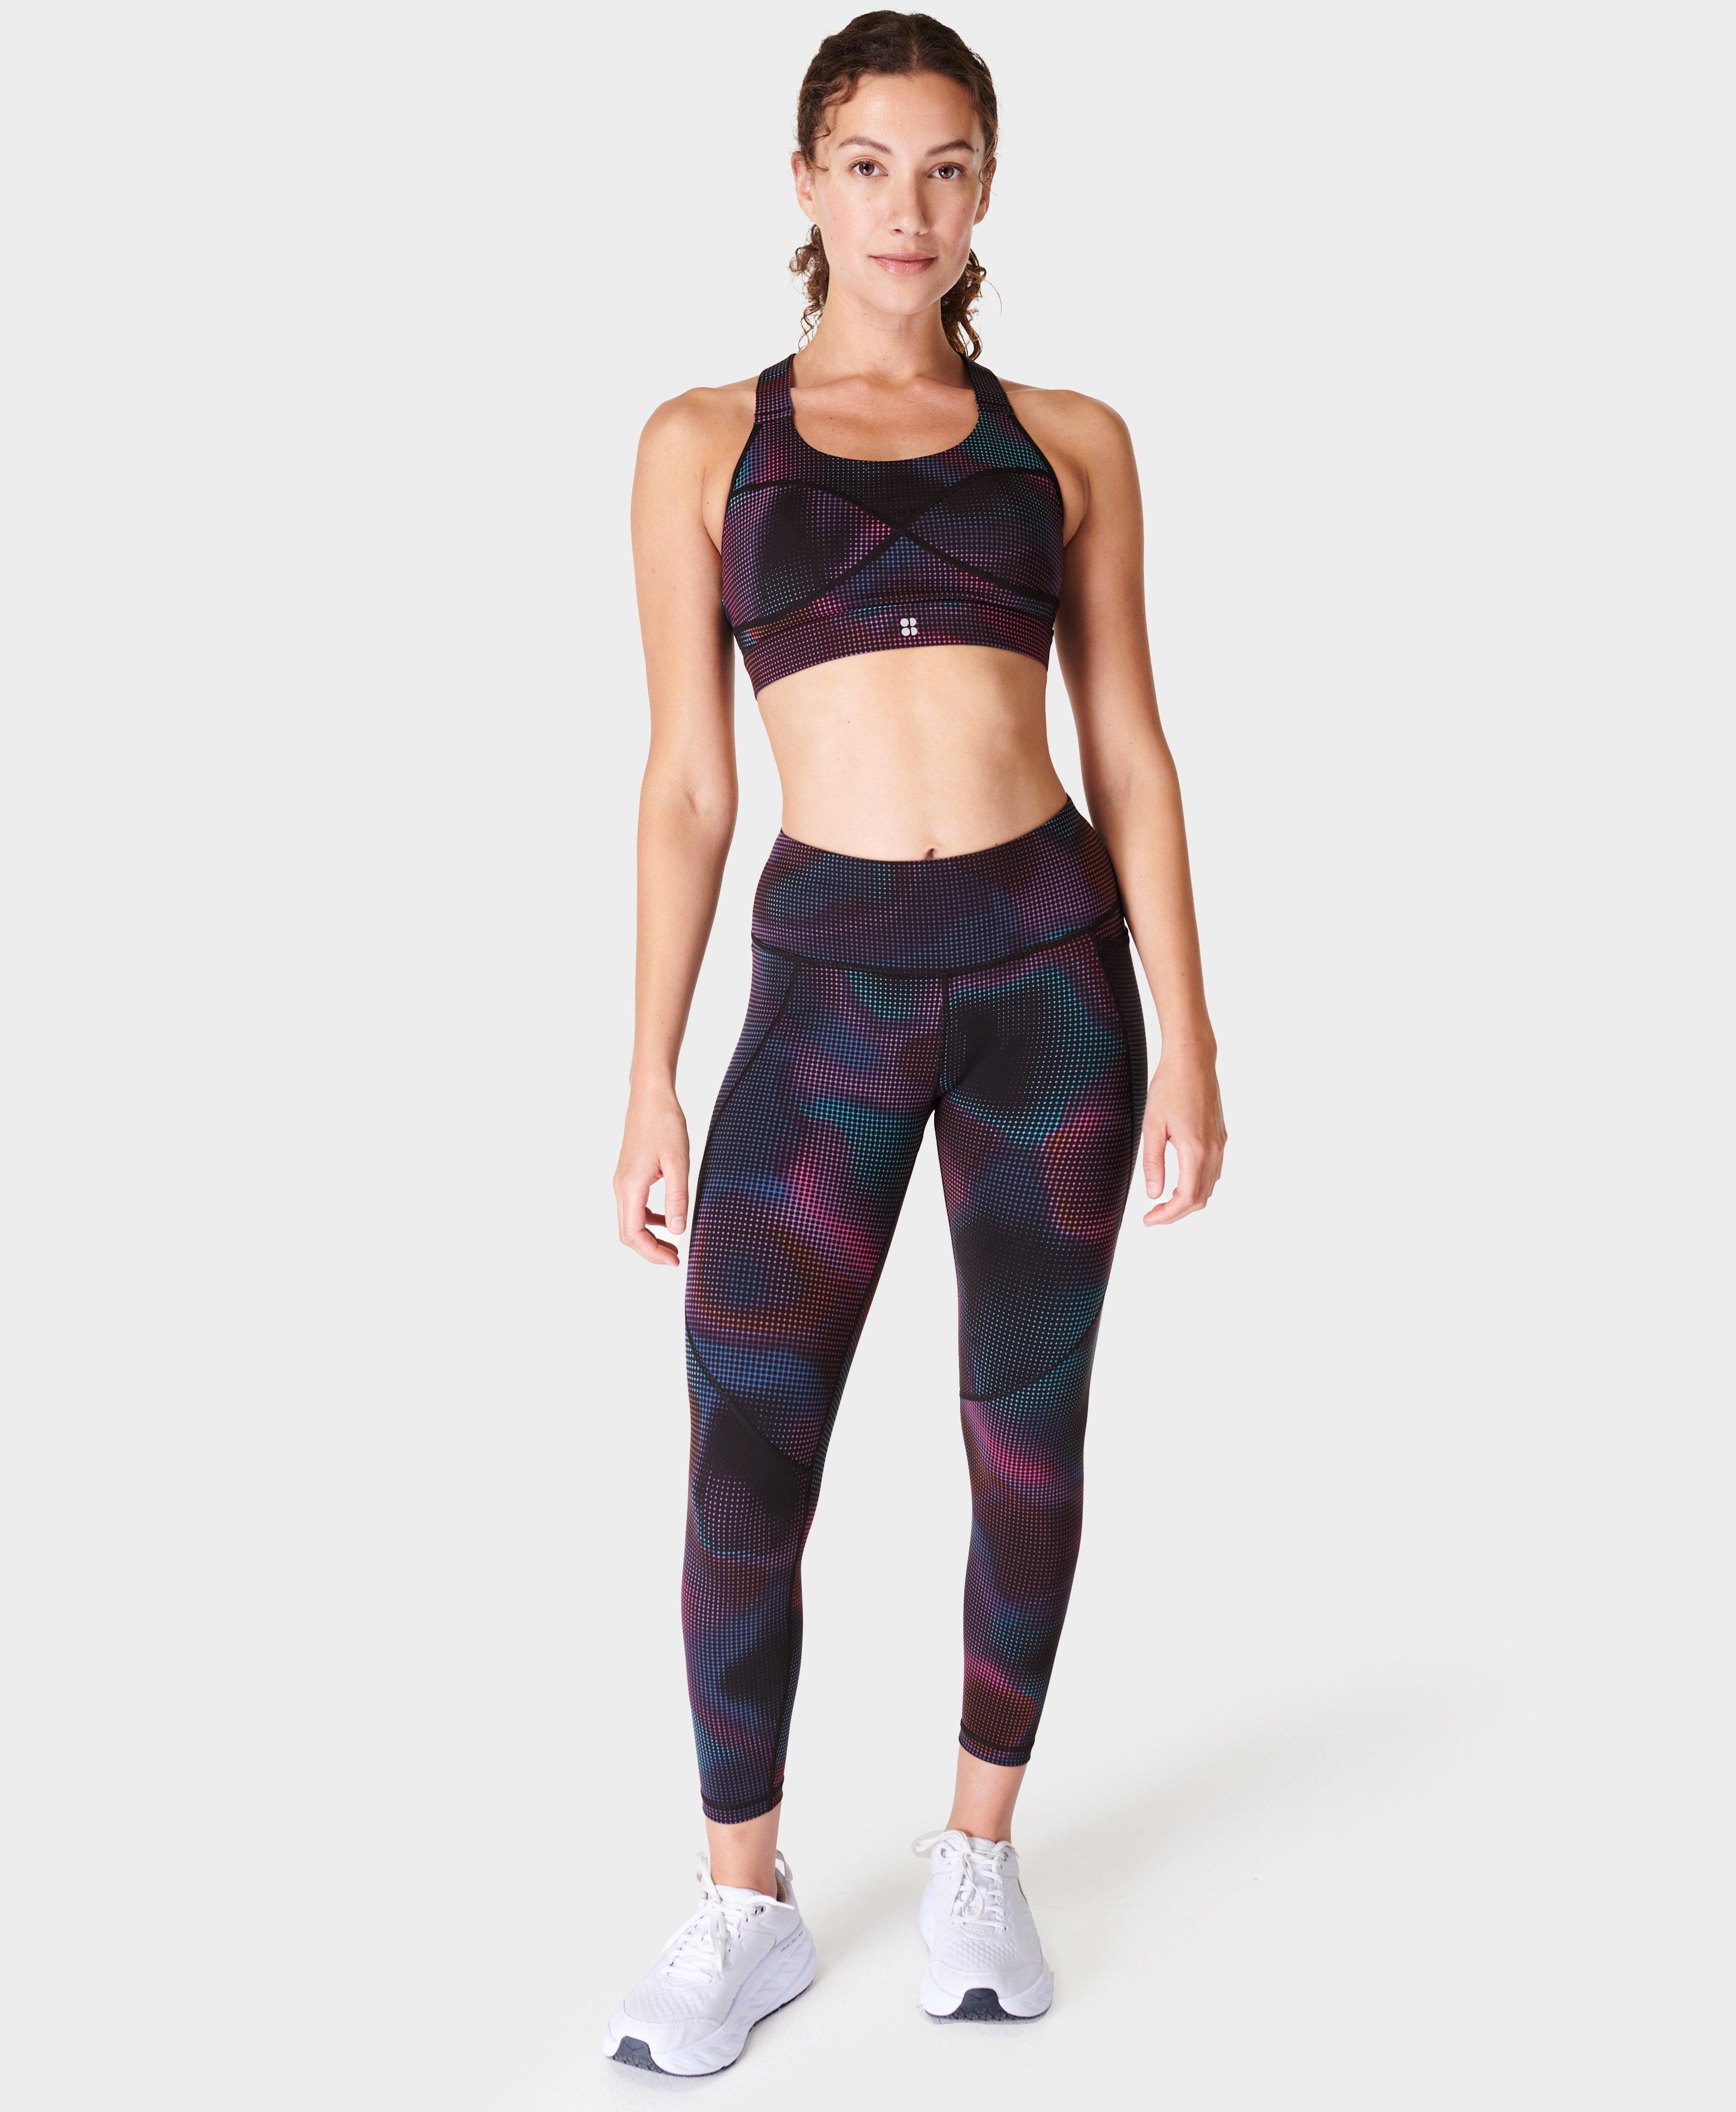 Sincerely Active Blog: Sports bra style series continued. Pair your solid  colored sports bra with loose patterned pants for street style vibes!